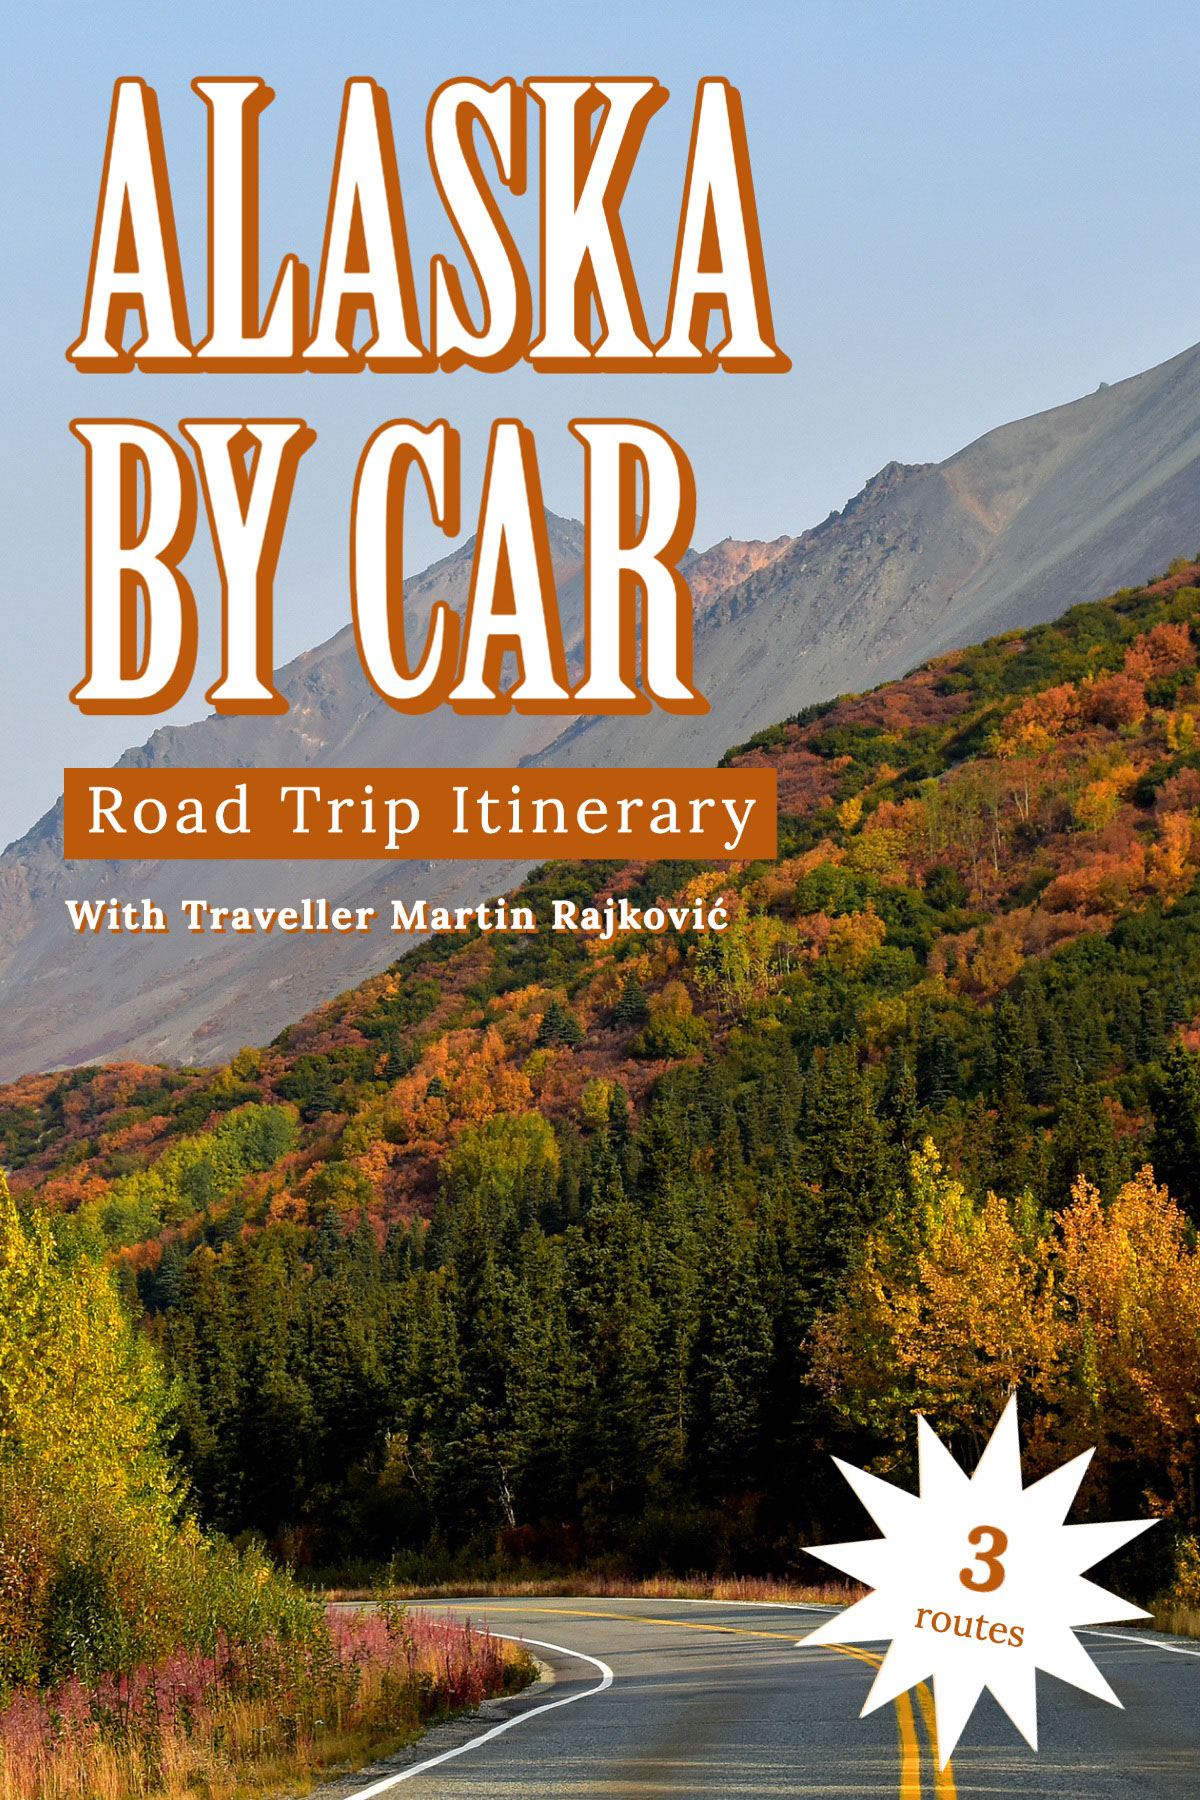 Brown & Green Forest Landscape Road Trip Itinerary Pinterest Post ALASKA BY CAR 3 Road Trip Itinerary routes With Traveller Martin Rajkovi?